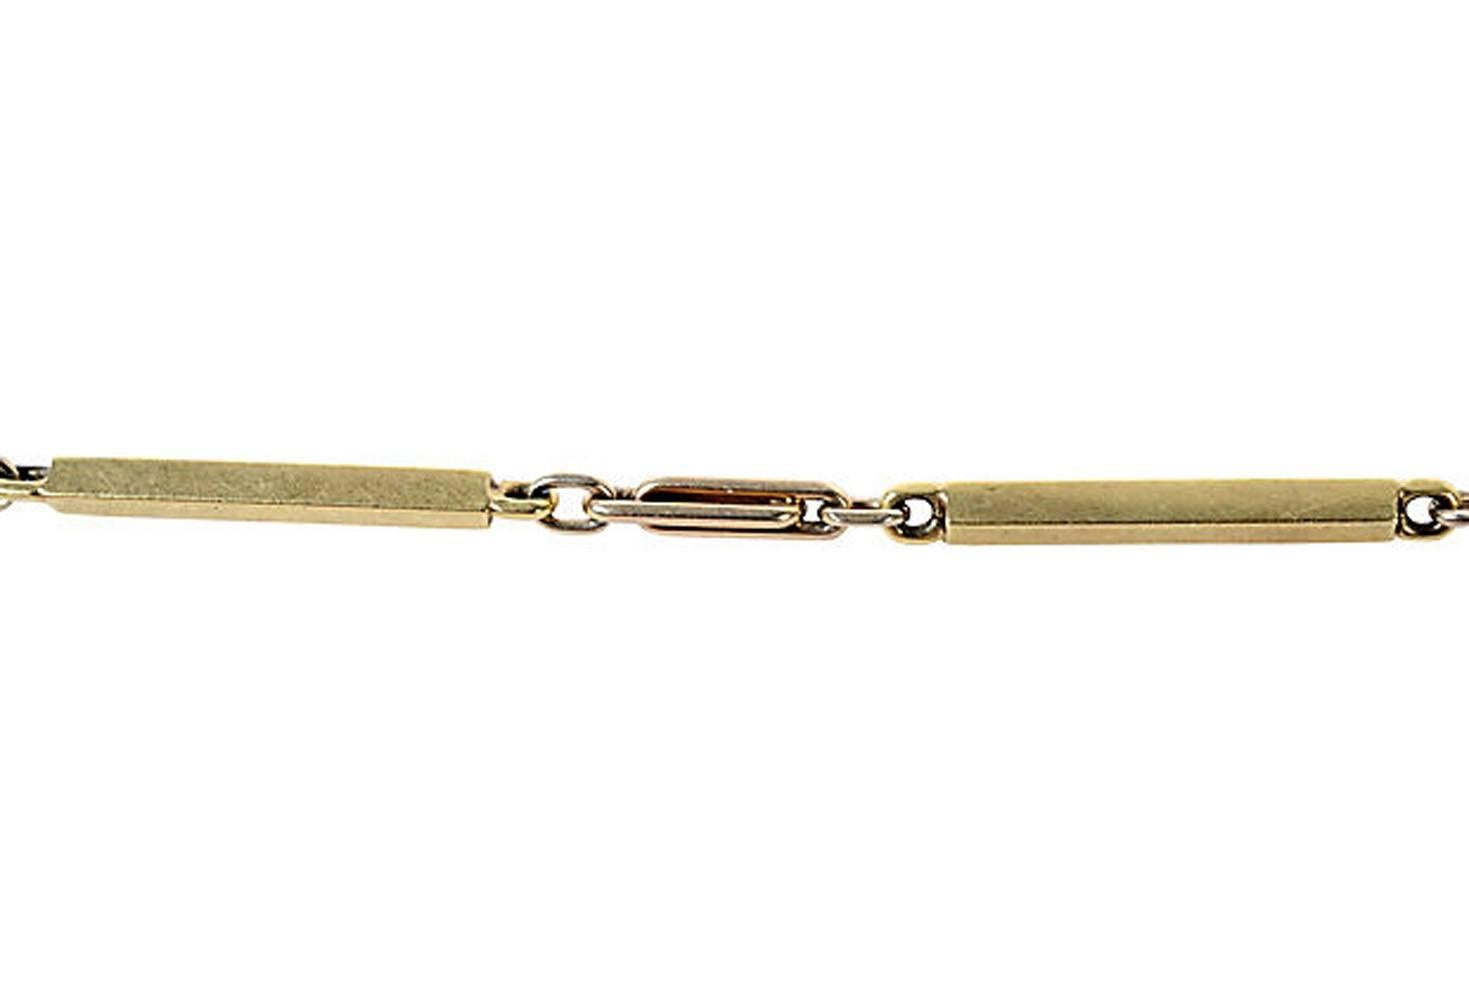 14K yellow gold watch chain with smooth and off-set split gold bars and chain. Weight: 12.6 grams. Marked: 14K. Age wear.
N.P. Trent has been a respected name in antiques for over 30 years with a large collection of antique and vintage fashion and